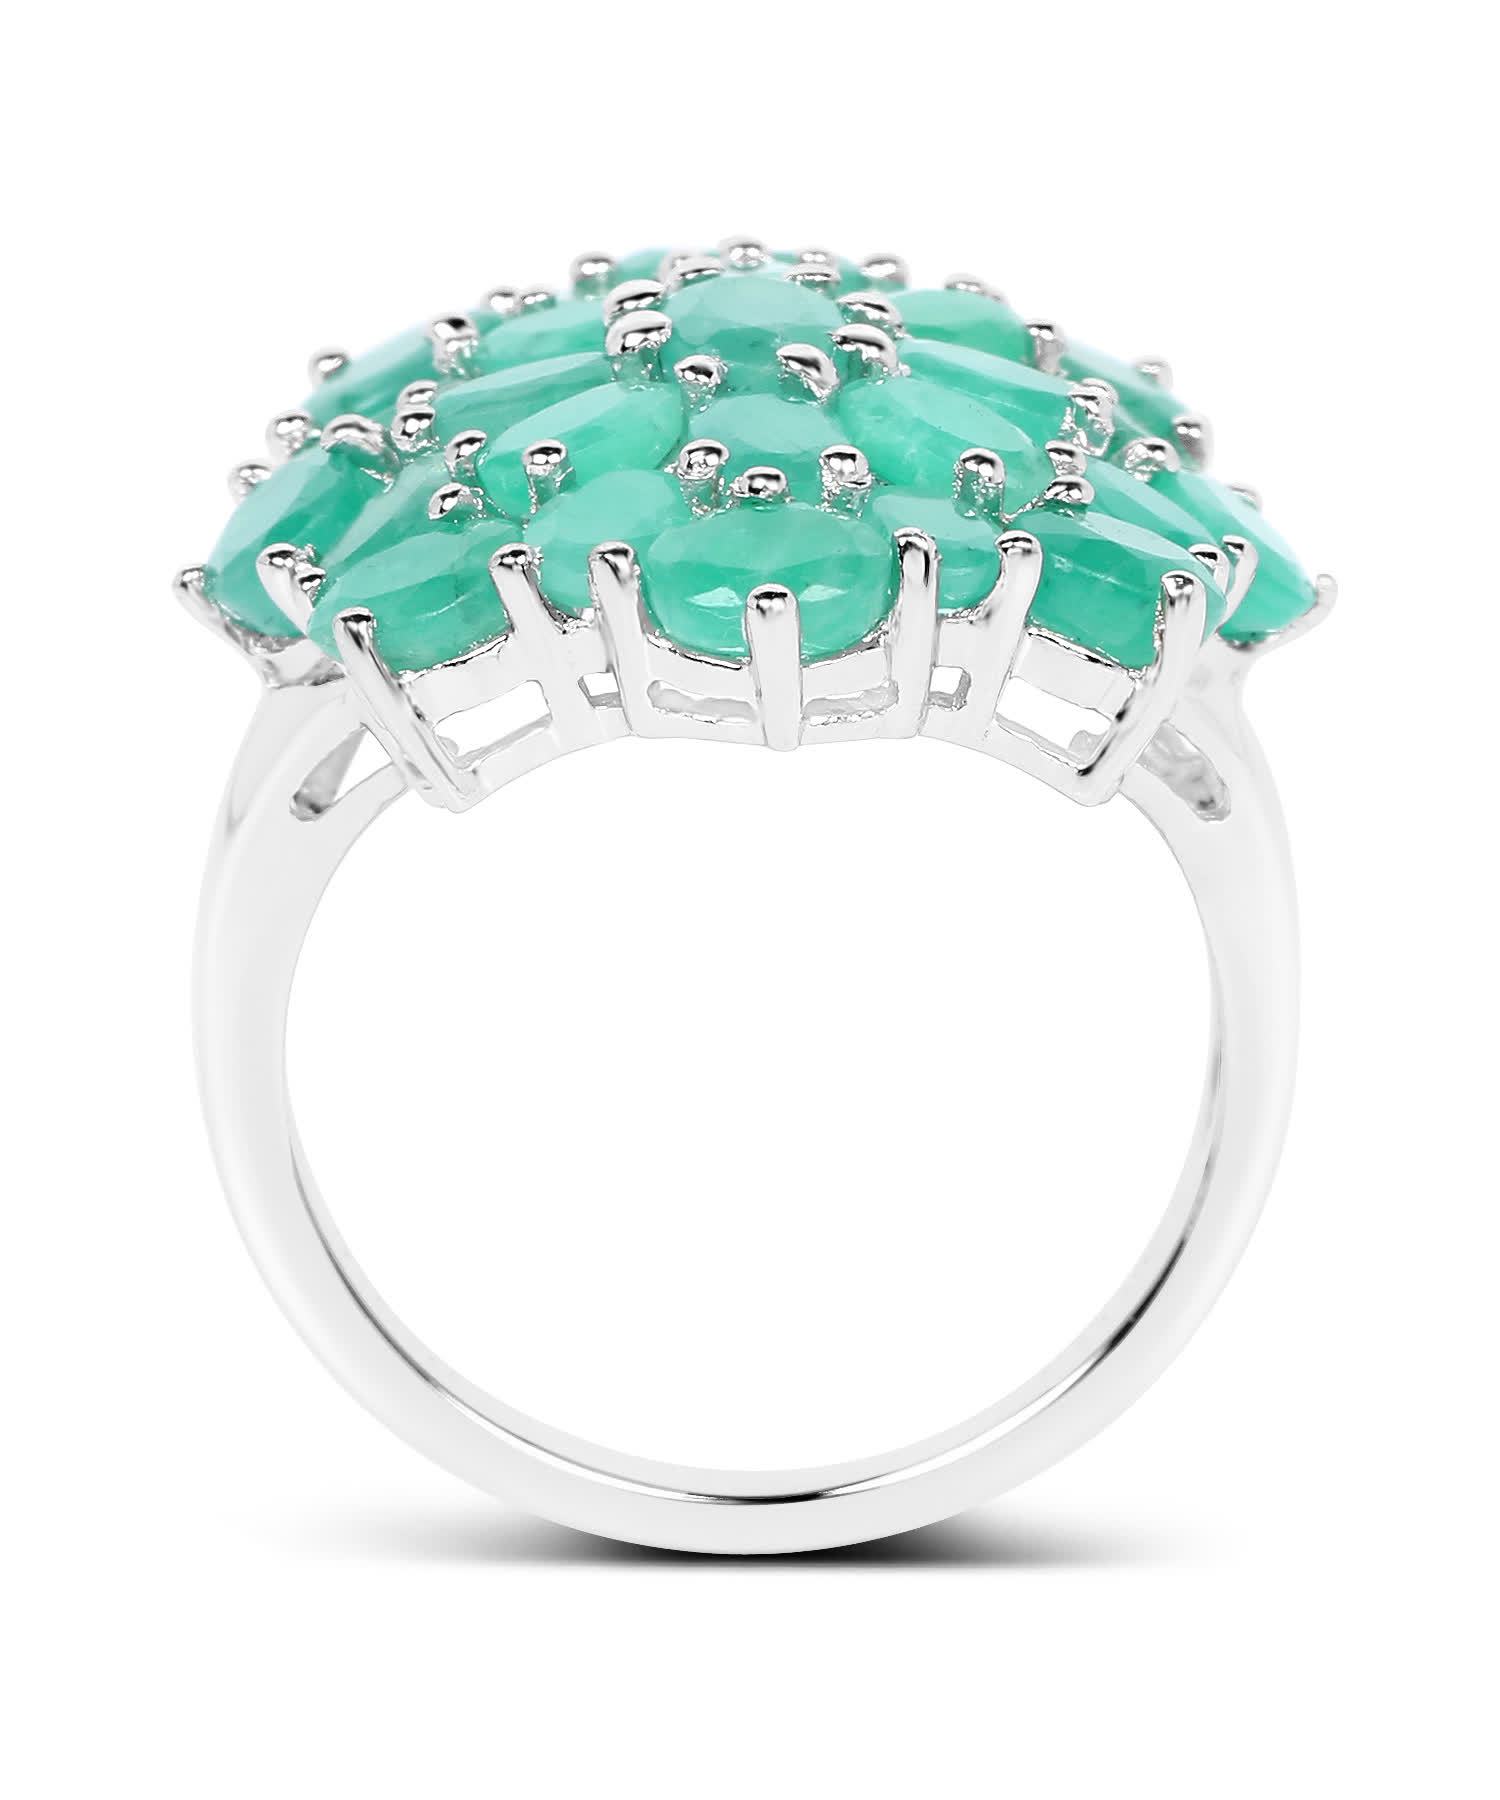 5.70ctw Natural Emerald Rhodium Plated 925 Sterling Silver Cocktail Ring View 2